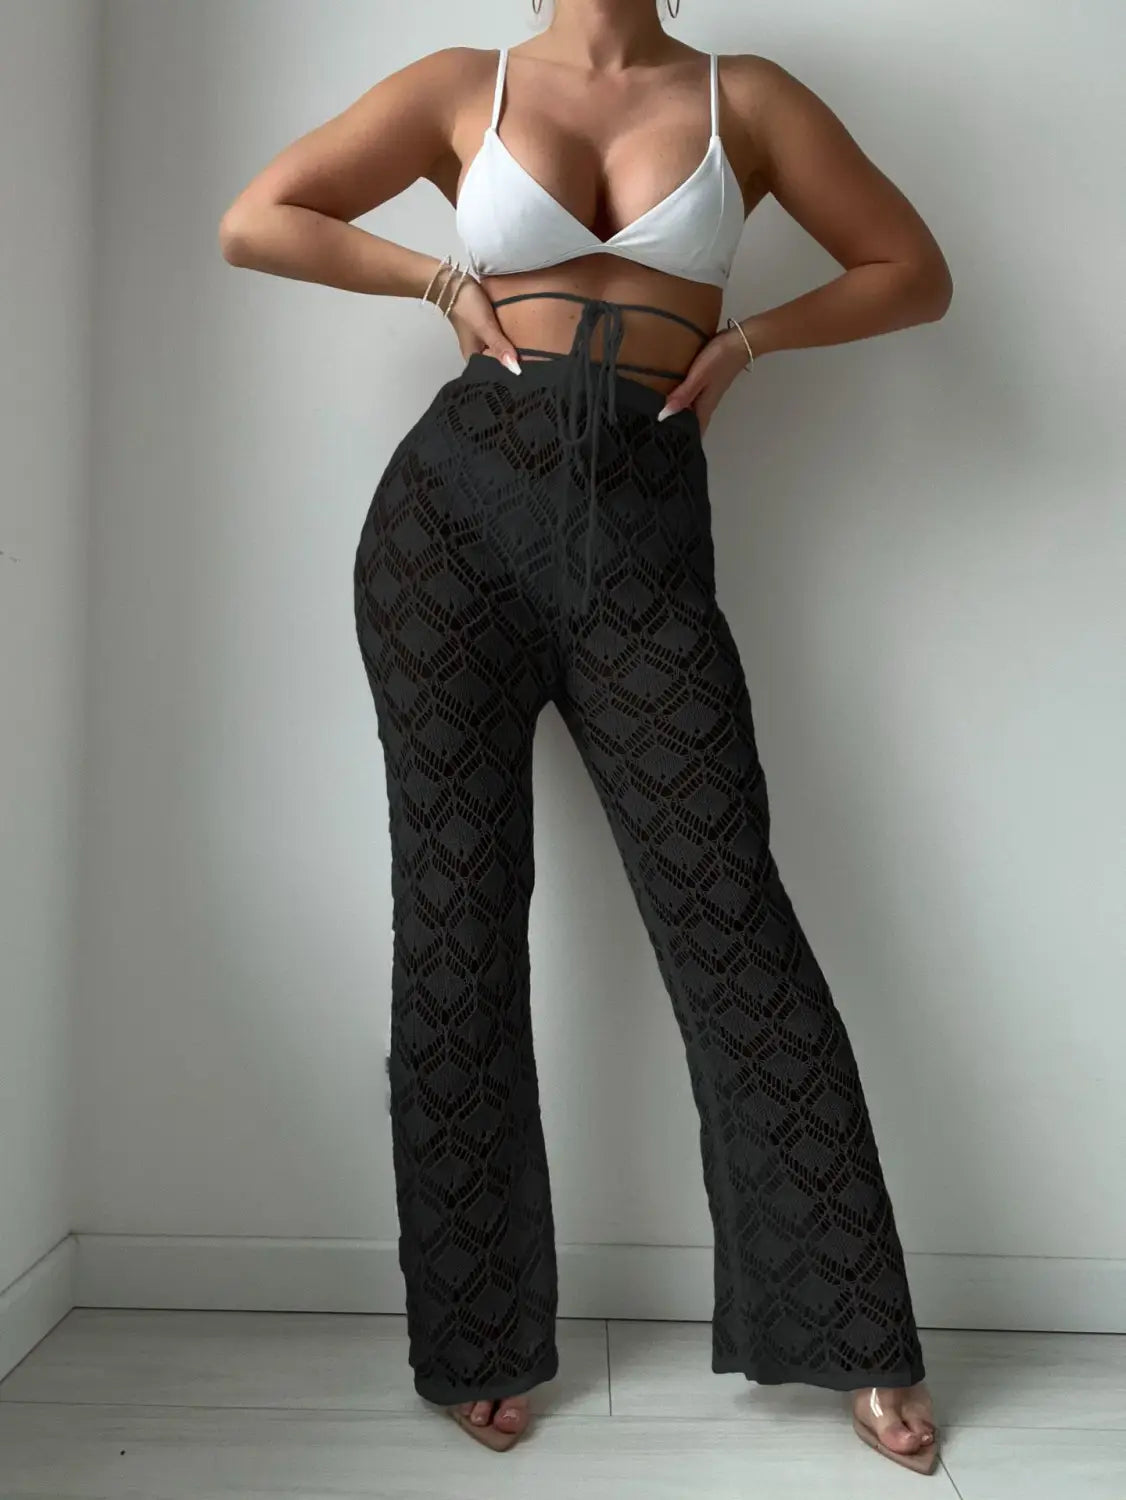 Bohemian Bliss Hollow Out Trousers - Your Beachside Statement